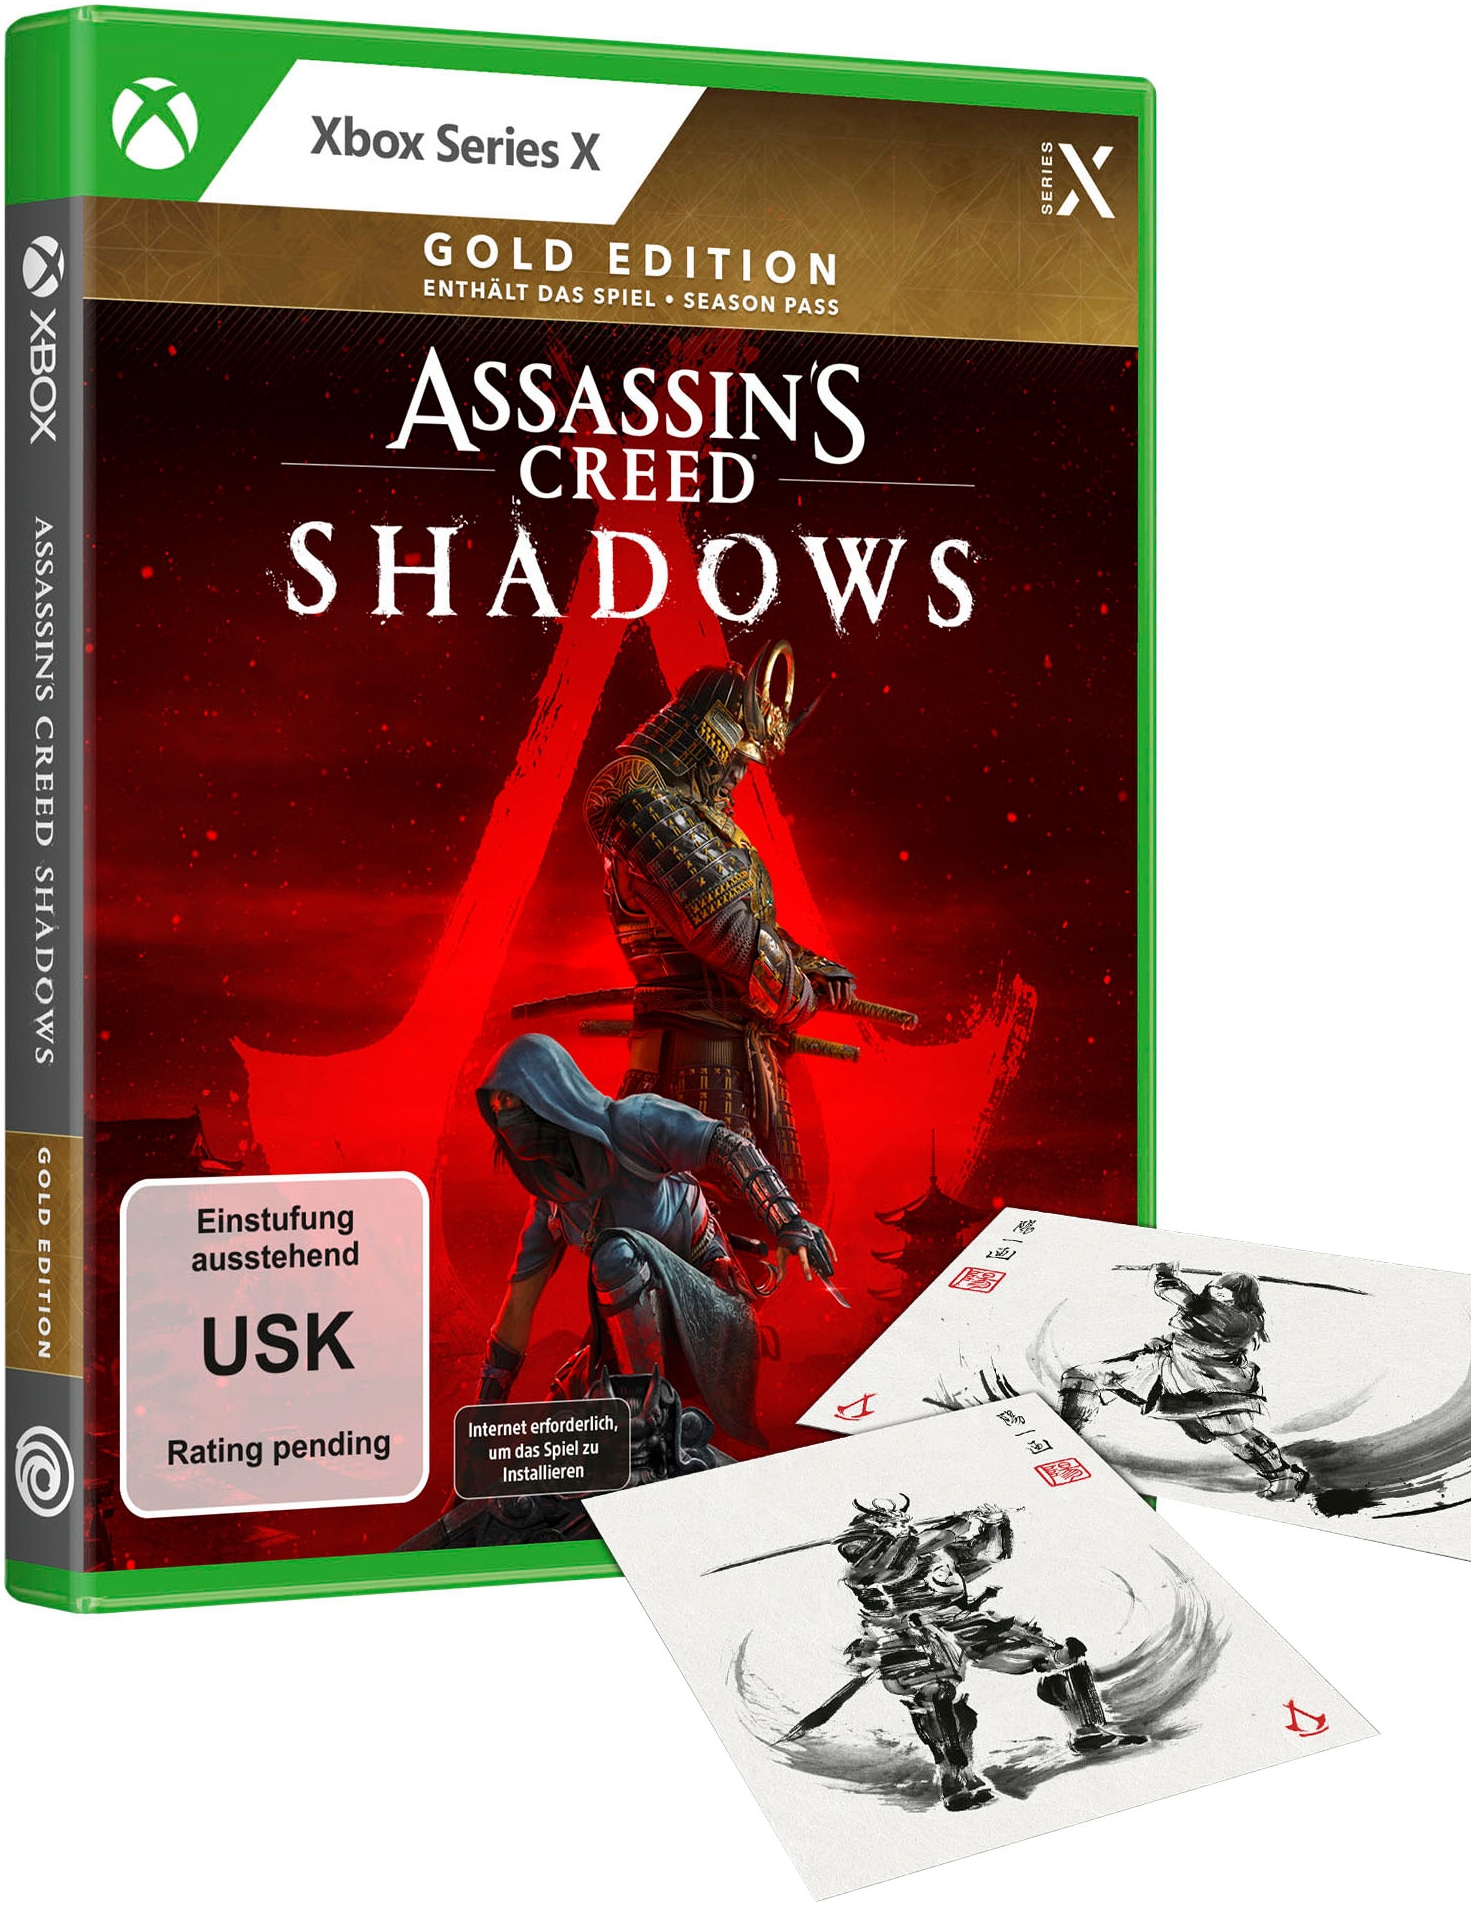 UBISOFT Spielesoftware »Assassin's Creed Shadows Gold Edition«, Xbox Series X